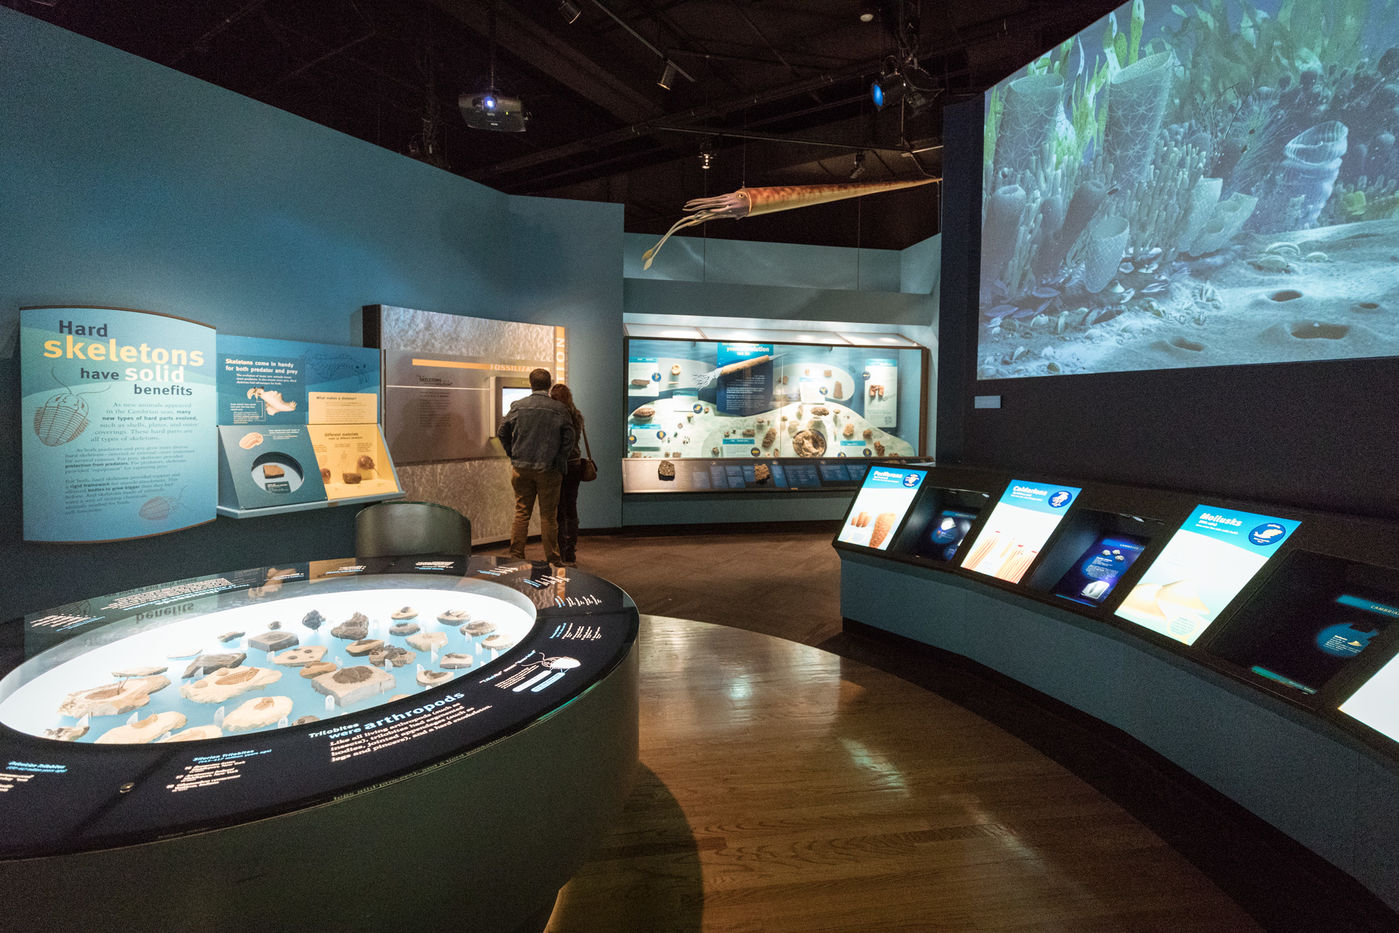 Visitors dive into learning about the life forms that inhabited oceans during the Cambrian period.